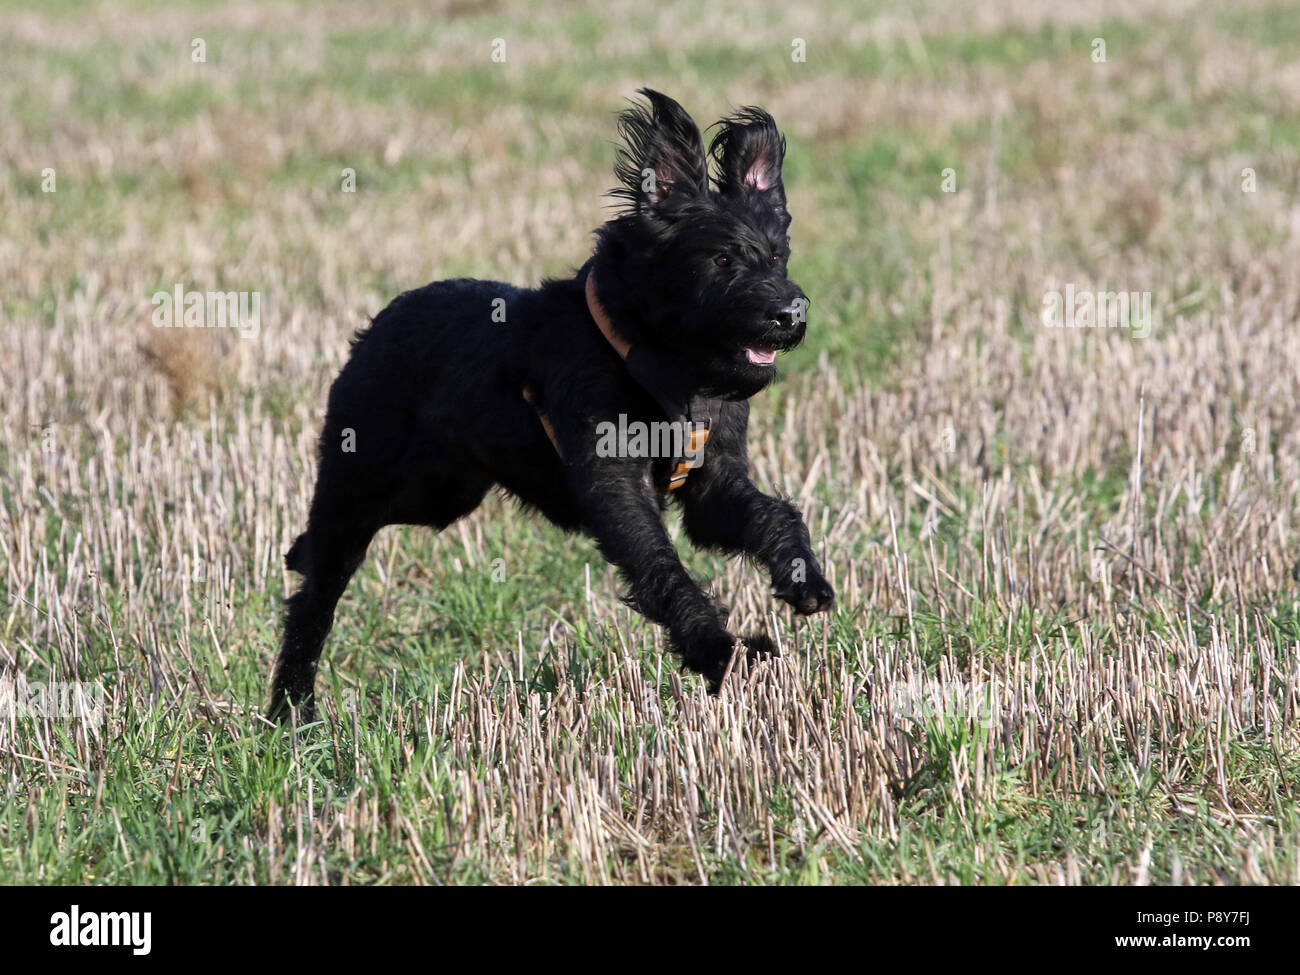 Neustadt (Dosse), Germany, Riesenschnauzer is running over a stubble field Stock Photo